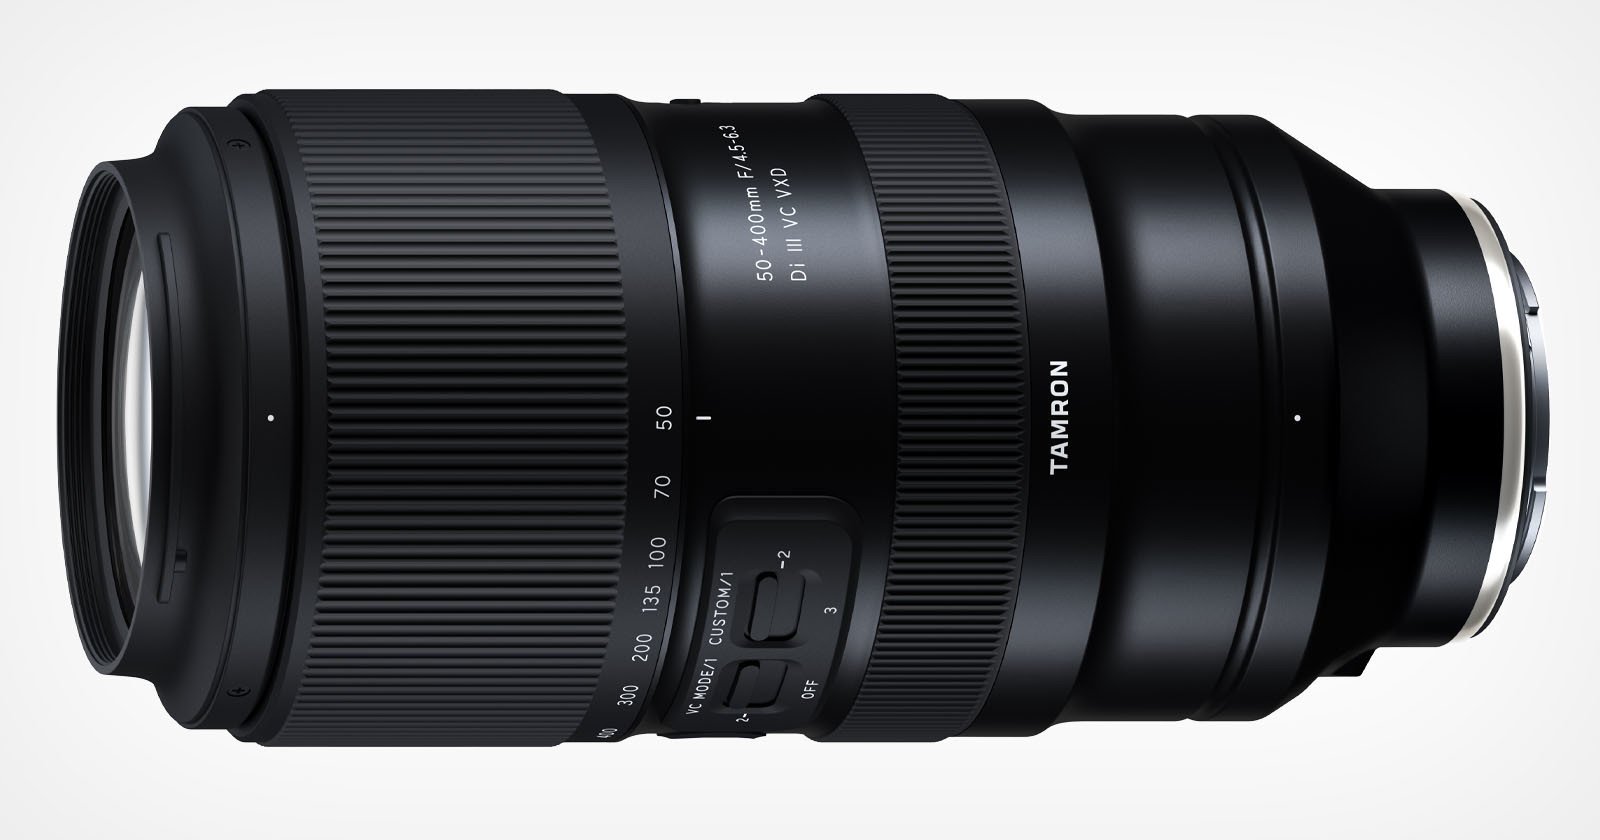 Tamron Unveils 50-400mm f/4.5-6.3 Lens: A New Category of Telephoto